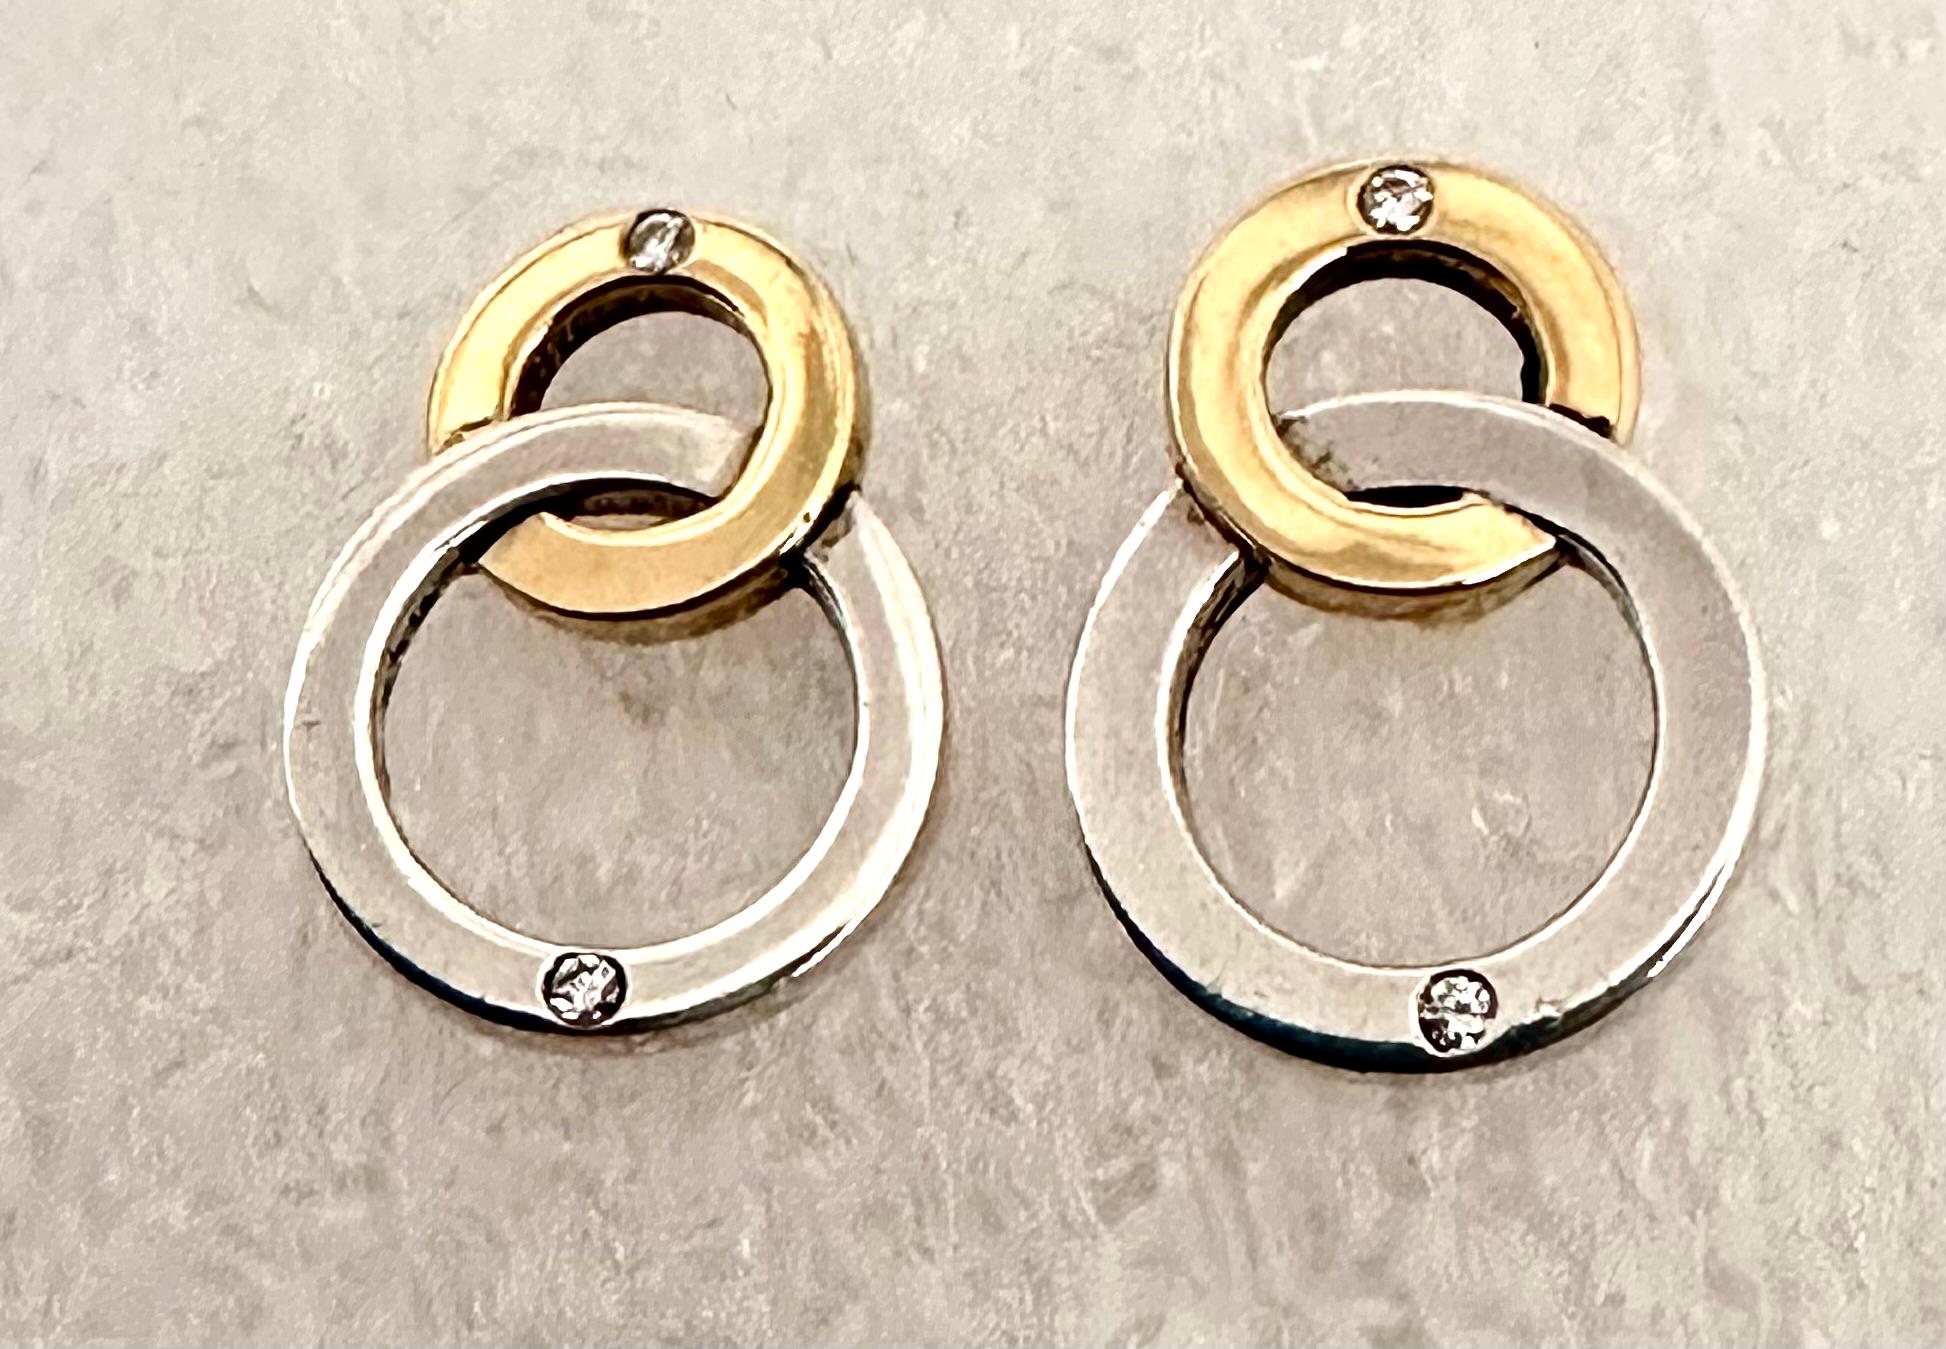 18k Yellow Gold and Sterling Silver .925 with 4 total Diamonds Post Earrings.
Earrings measure approx. 16mm x 22mm 


                          THEORY OF GIVING:
Silver has been important to mankind since before the Bible was written. It was used to